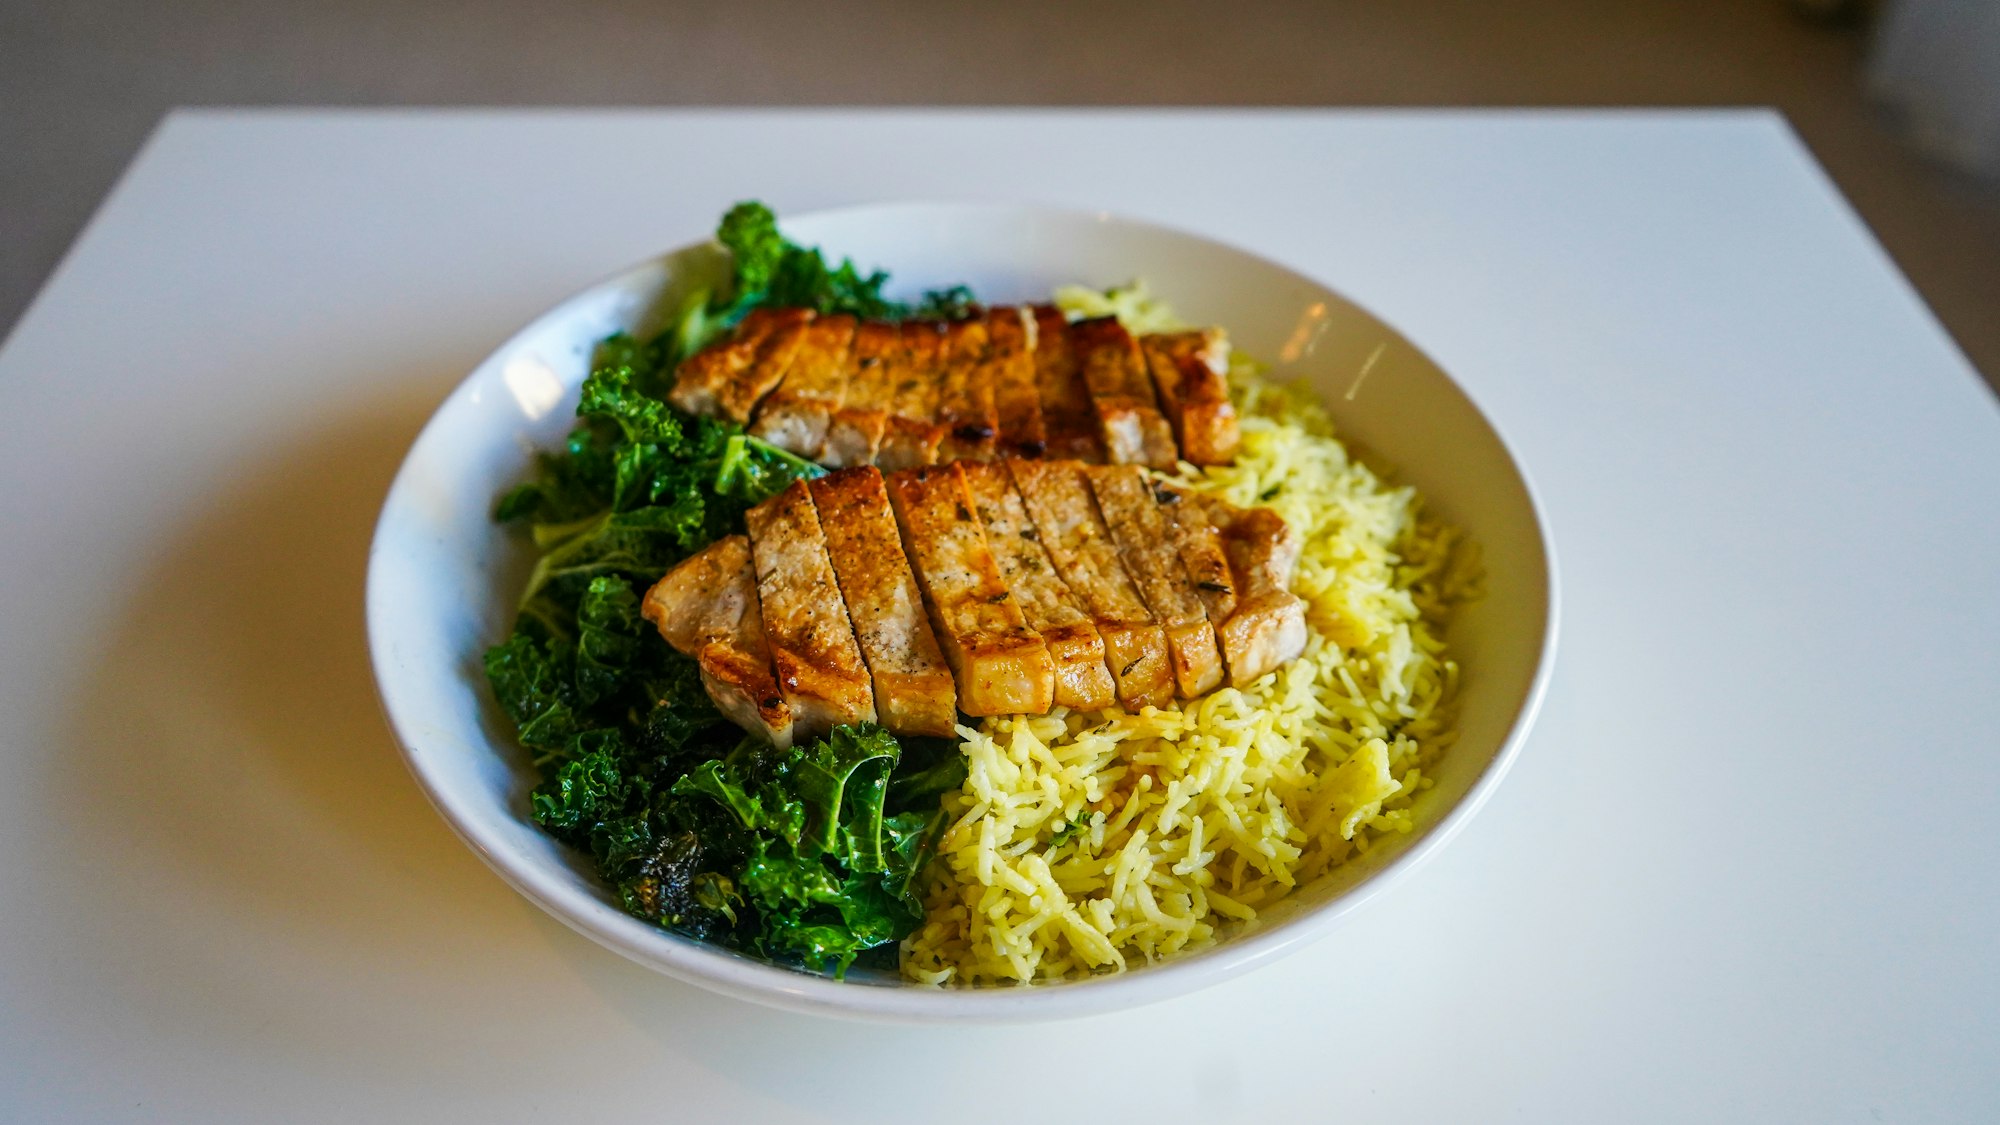 A freshly served bowl of Pork Loin Steaks on a bed of Kale and Lemon Rice.